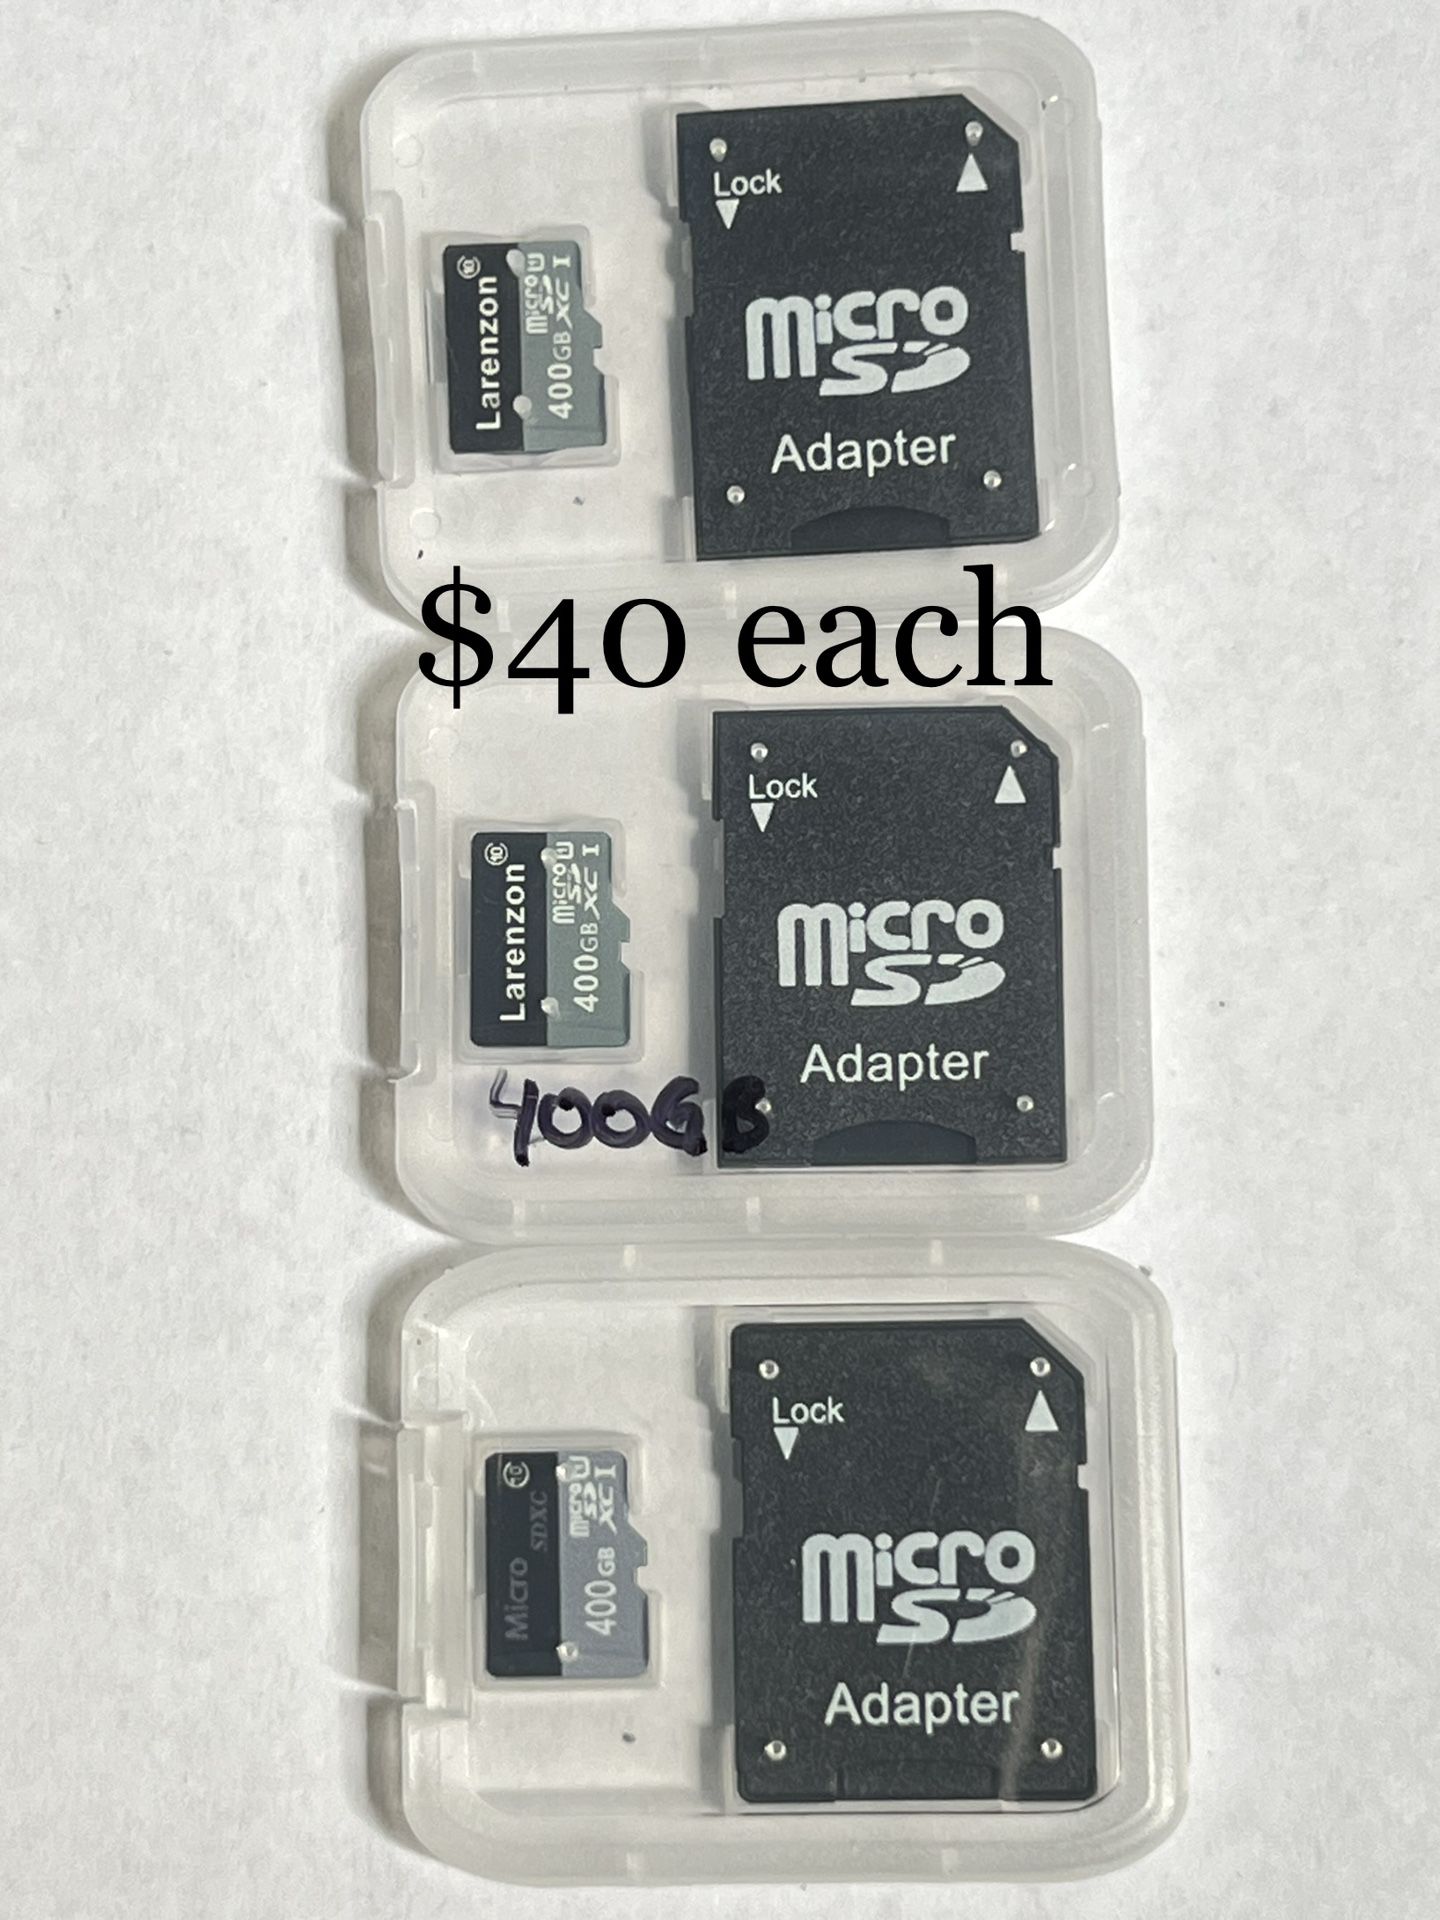 $40 Each 400GB MicroSD Memory Cards Micro SD Card for Phone,Portable Gaming Devices, Dash Cam, Camcorder, Surveillance, Drone.